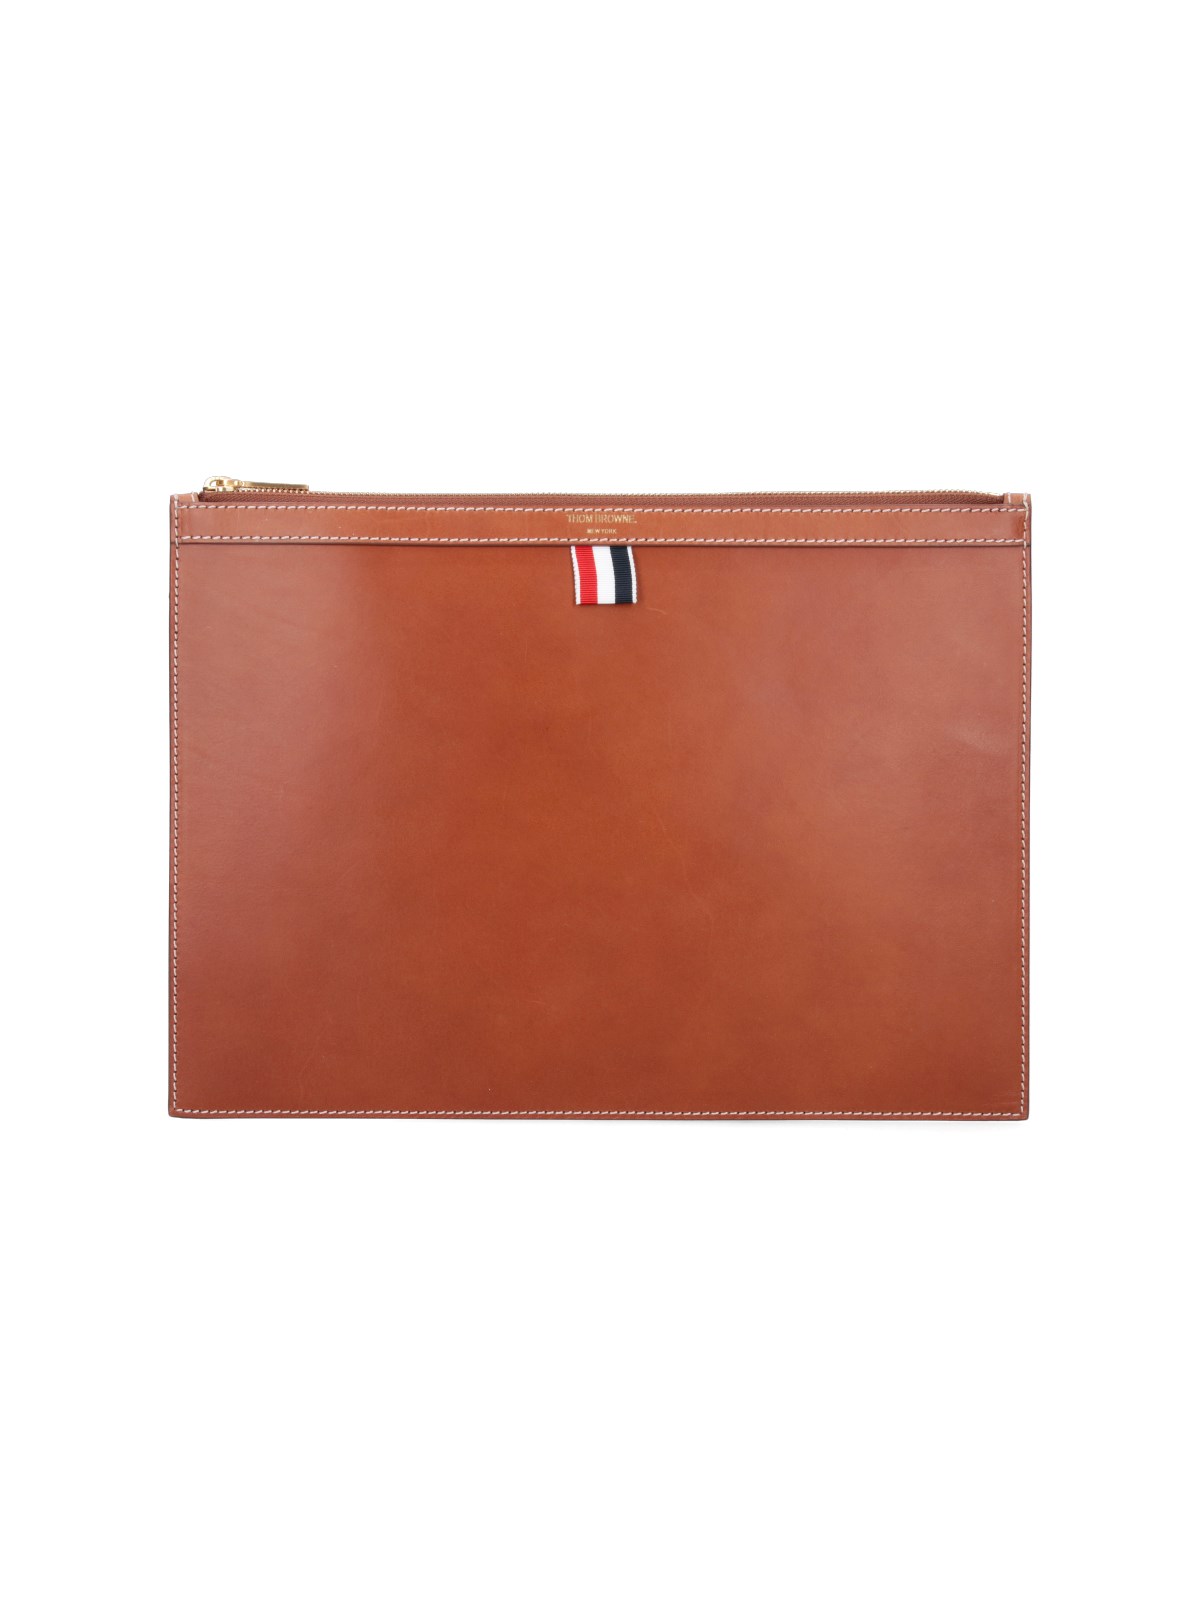 Thom Browne Tricolor Detail Document Holder In Brown